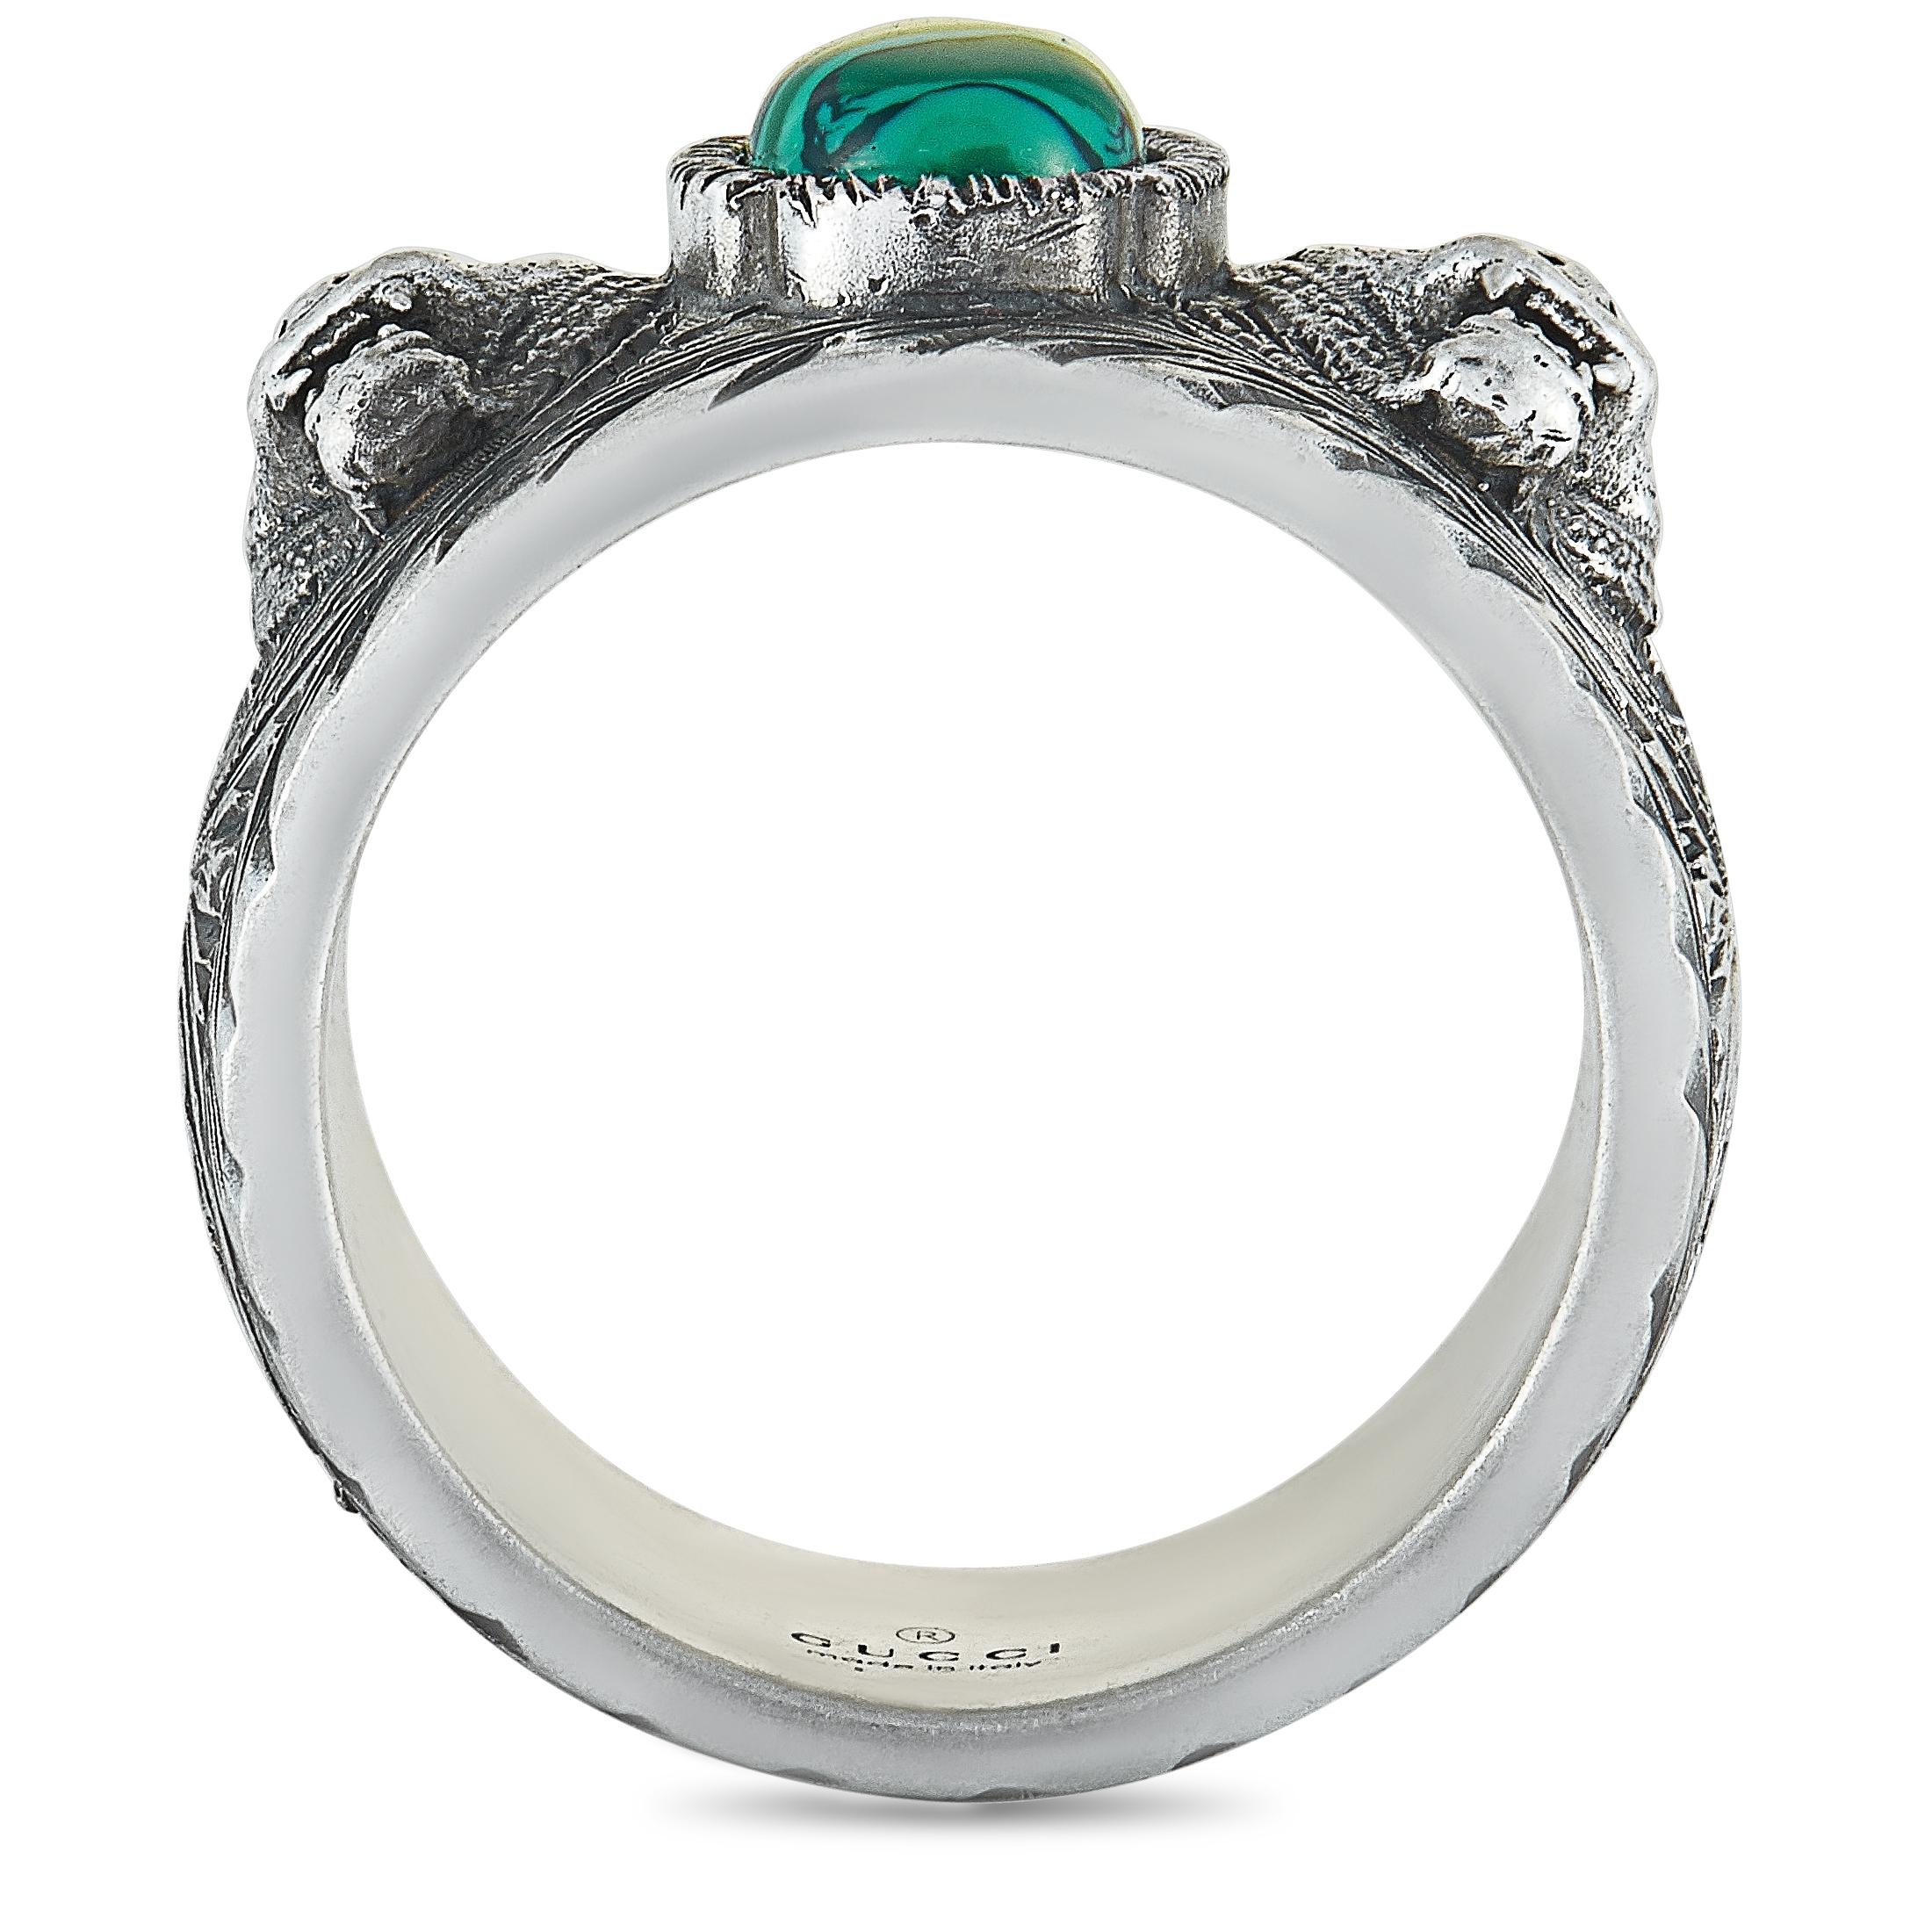 The Gucci “Garden” ring is made out of silver and a green resin stone and weighs 19.1 grams. The ring features an intricately engraved pattern and feline head motifs from the Gucci Garden, and boasts band thickness of 14 mm and top height of 6 mm,